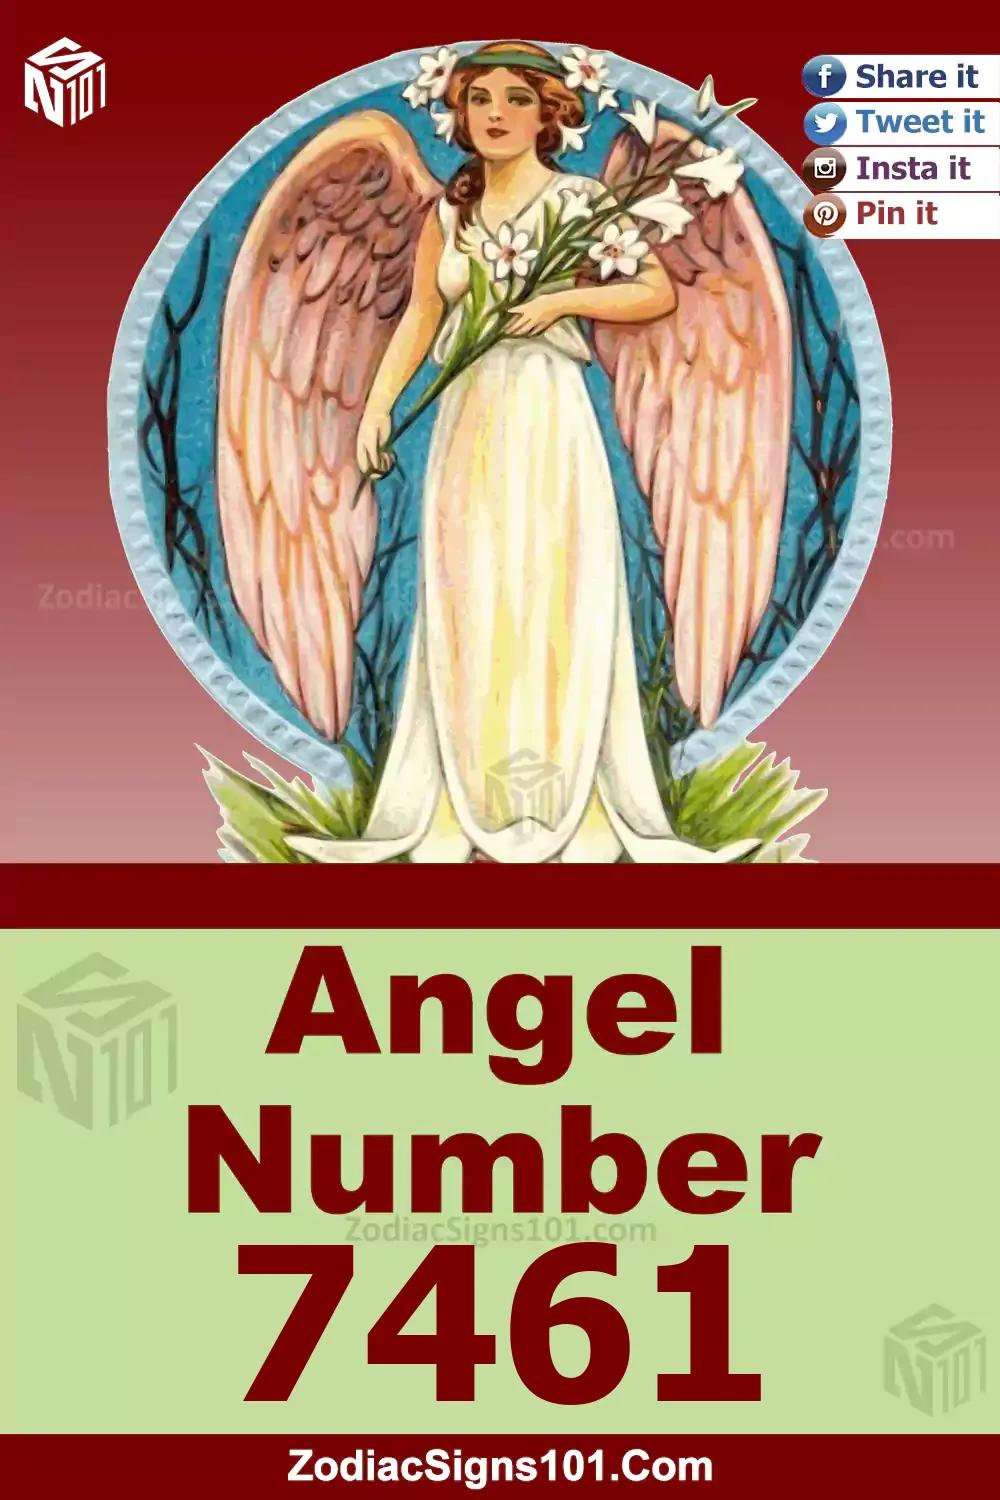 7461 Angel Number Meaning